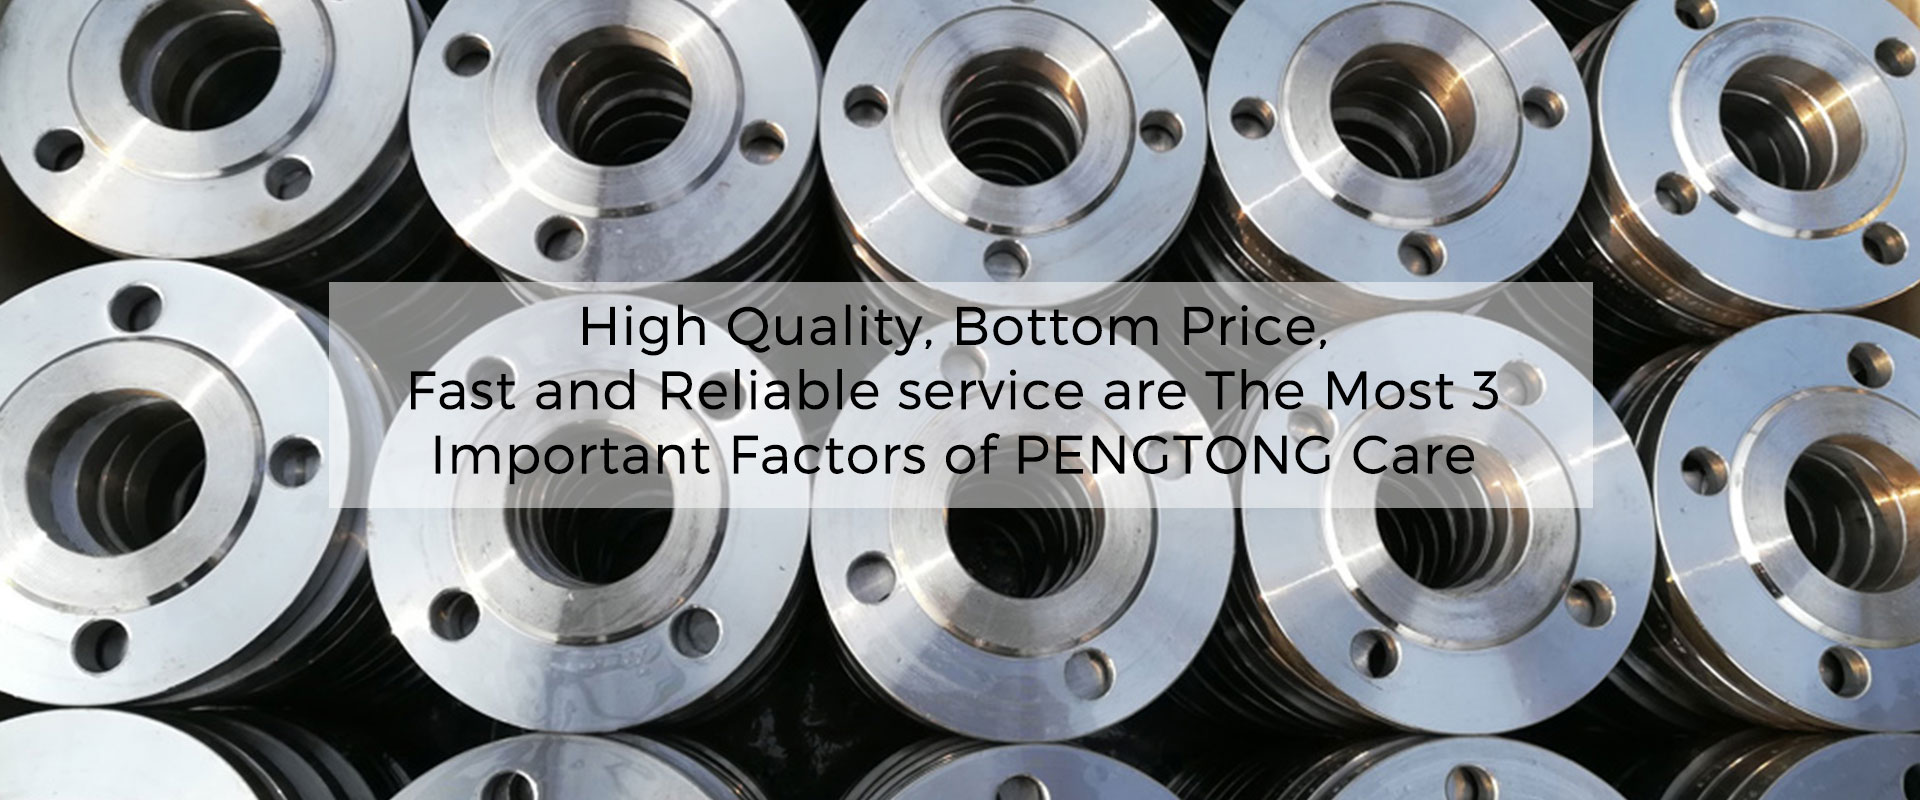 High Quality, Bottom Price, Fast and Reliable service are the most 3 Important Factors of PENGTONG Care